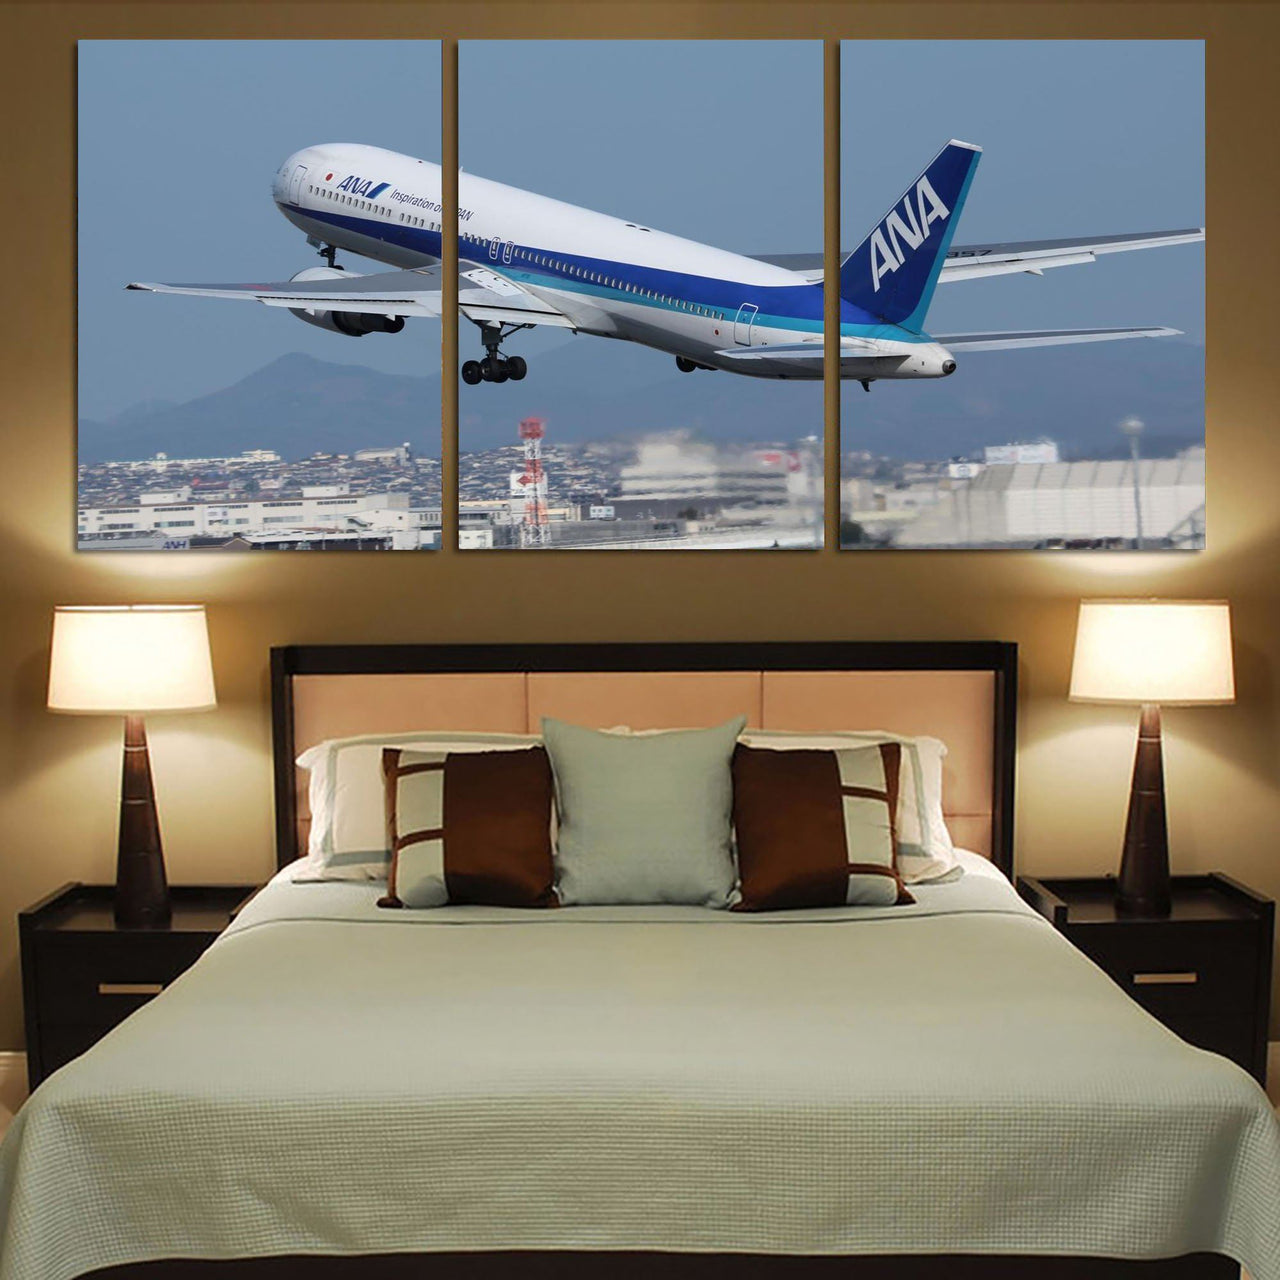 Departing ANA's Boeing 767 Printed Canvas Posters (3 Pieces) Aviation Shop 